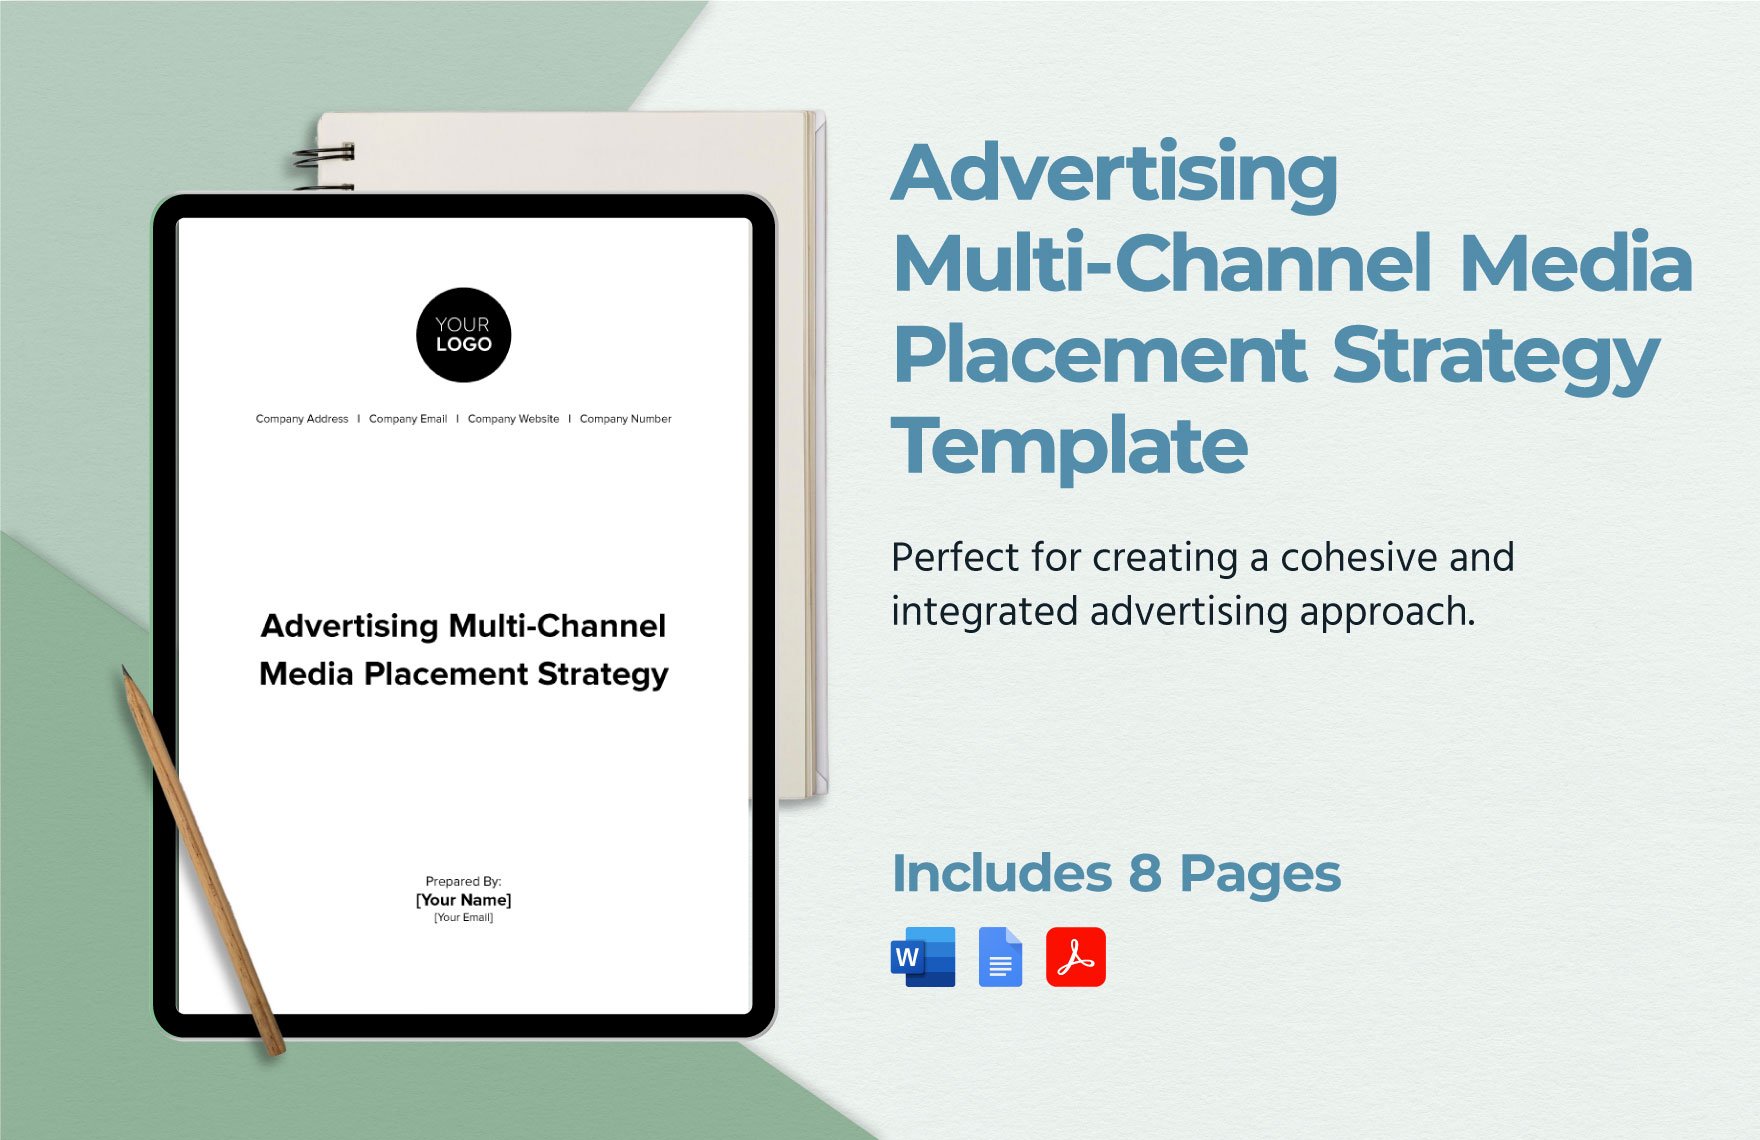 Advertising Multi-Channel Media Placement Strategy Template